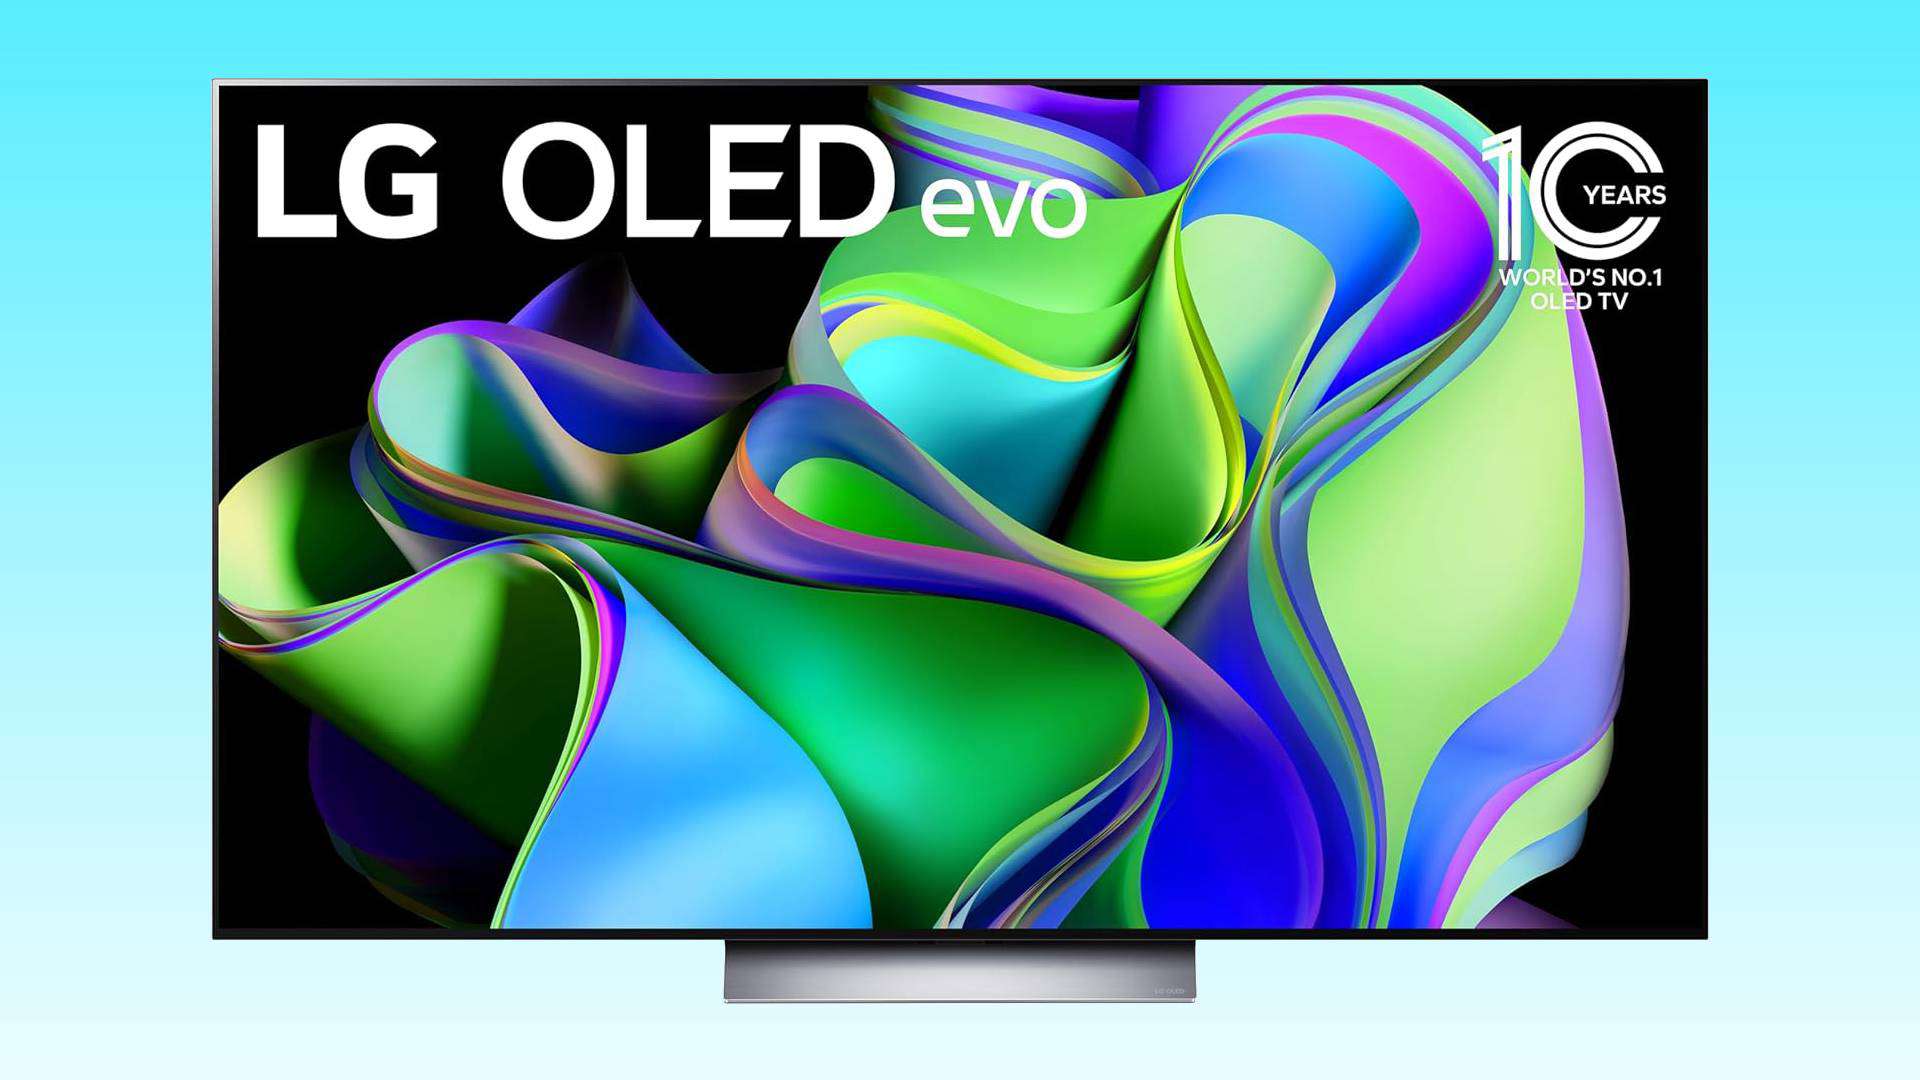 LG C3 OLED TV displaying vibrant, abstract multicolored swirls on its screen, with text boasting "10 years world's no 1 OLED TV.